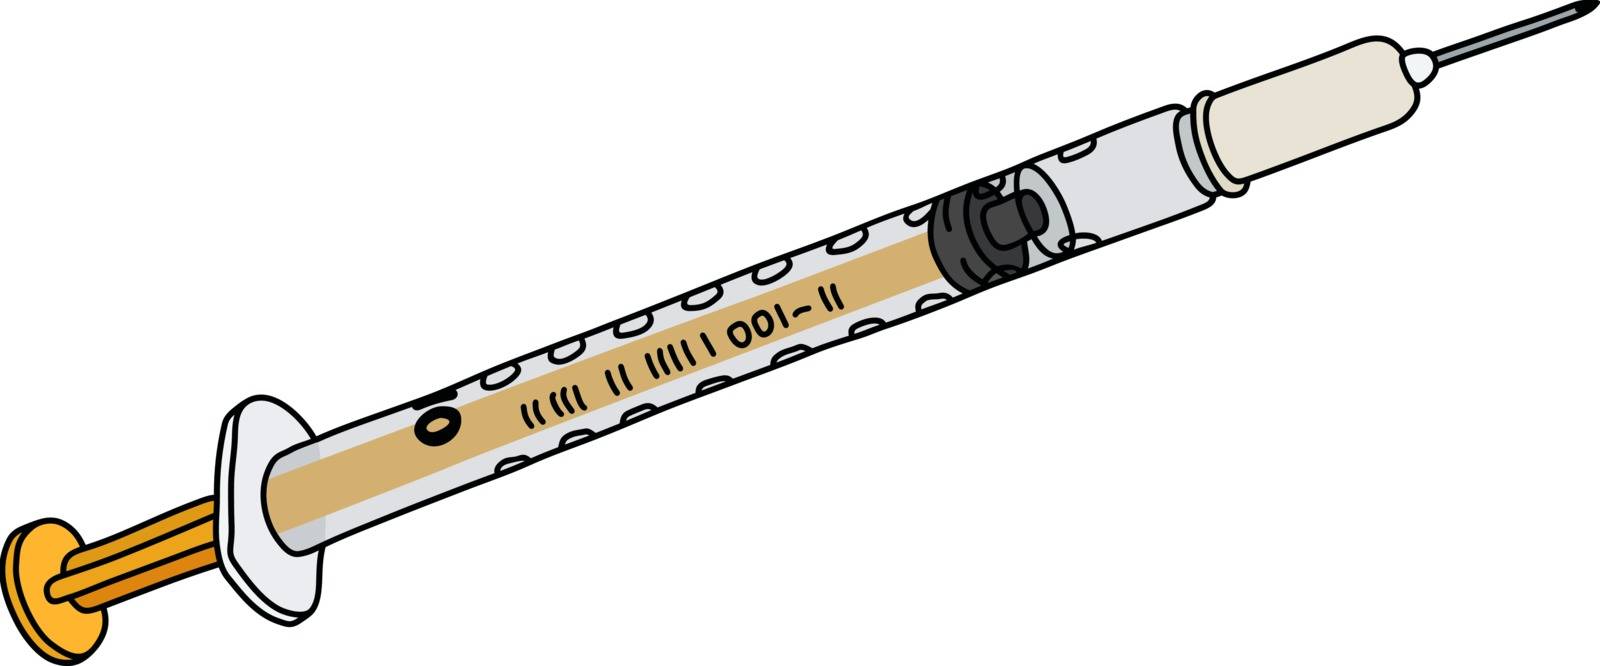 The vectorized hand drawing of a plastic thin syringe